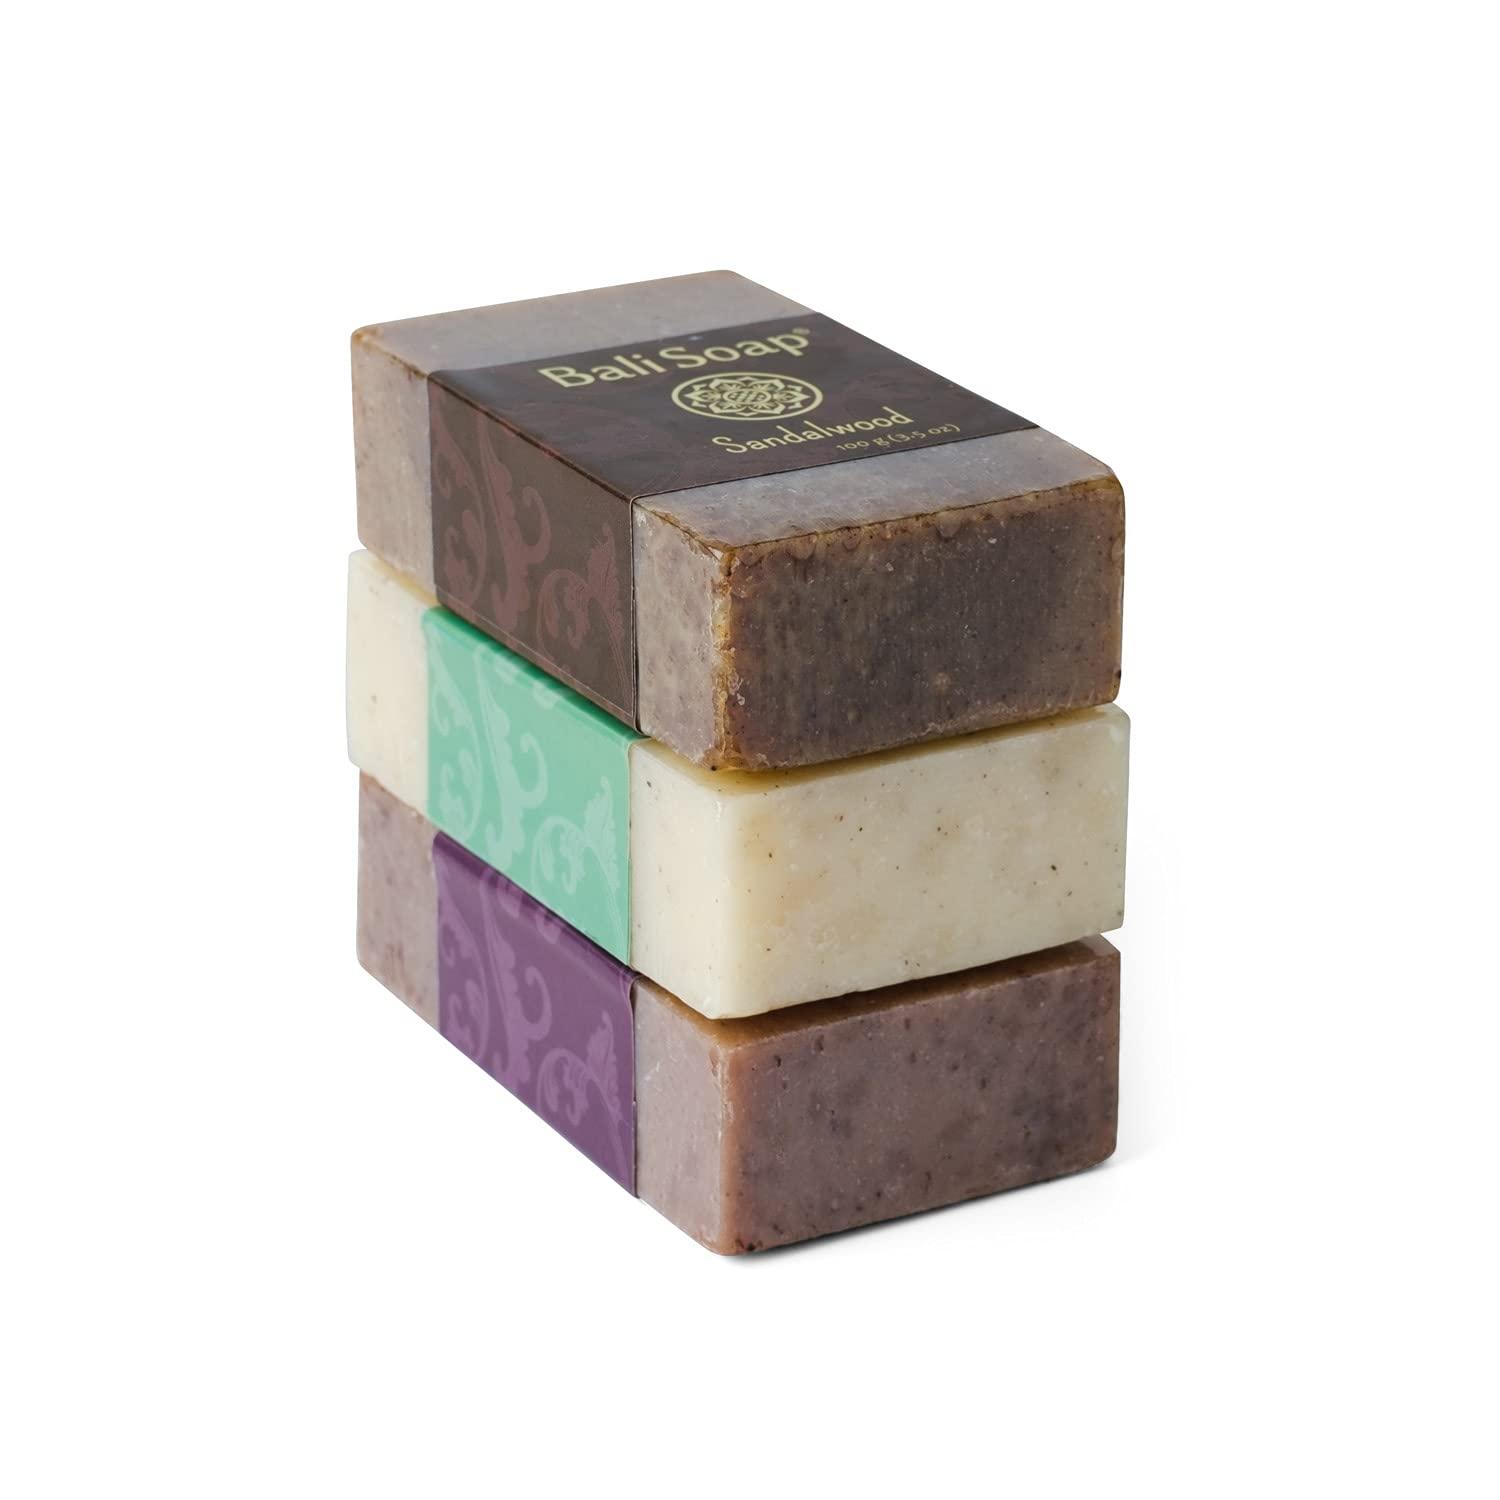  Bali Soap - Masculine Collection Natural Soap Bar Gift Set, 6  pc Variety Pack, Lemon-Pine, Ginger-Coffee, Sandalwood-Mint,  Agarwood-Spice, Clove-Cinnamon, Eucalyptus-Lime 3.5 Oz each : Beauty &  Personal Care